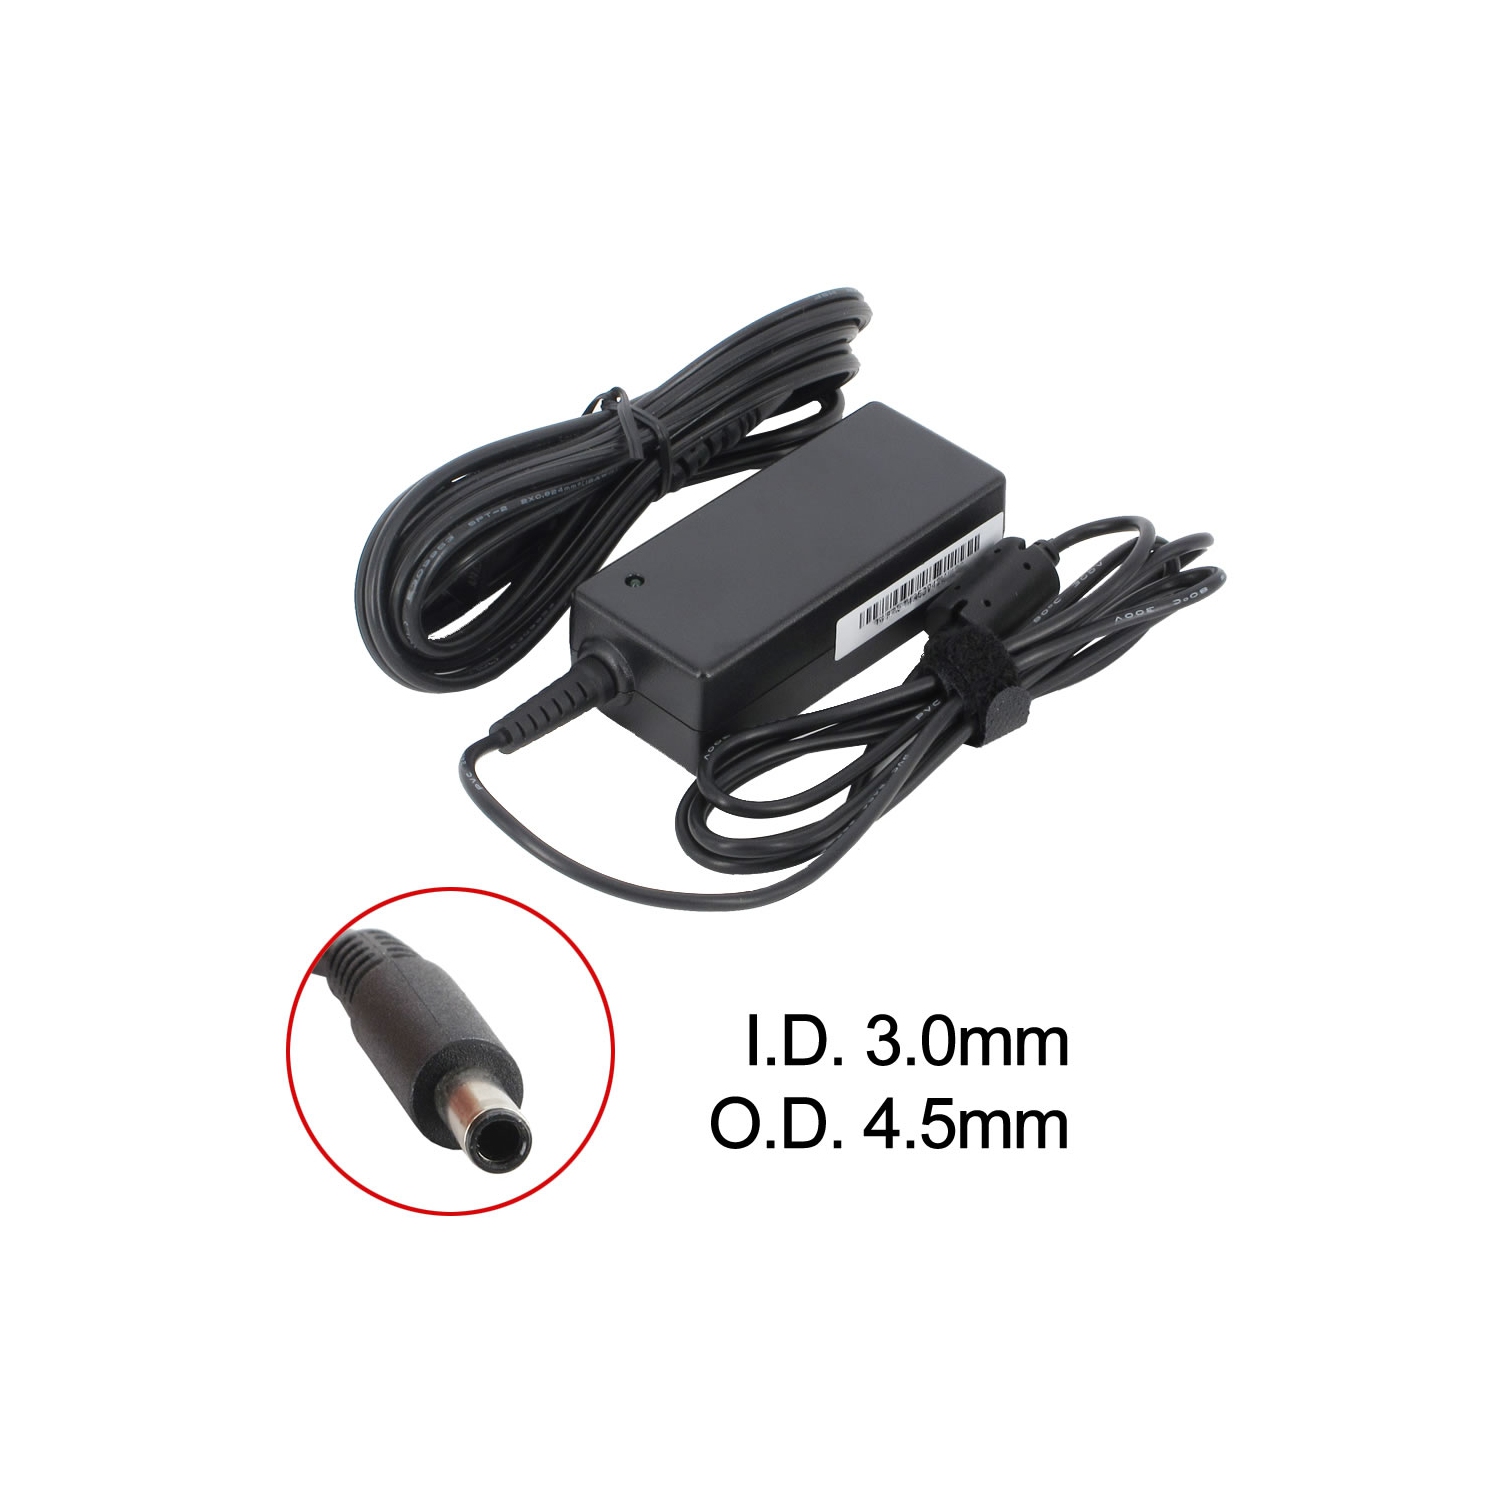 BattDepot: New Replacement Laptop AC Adapter for Dell XPS 12 Ultrabook, 332-1827, D0KFY, FA45NE1-00, LA45NM140, RFRWK